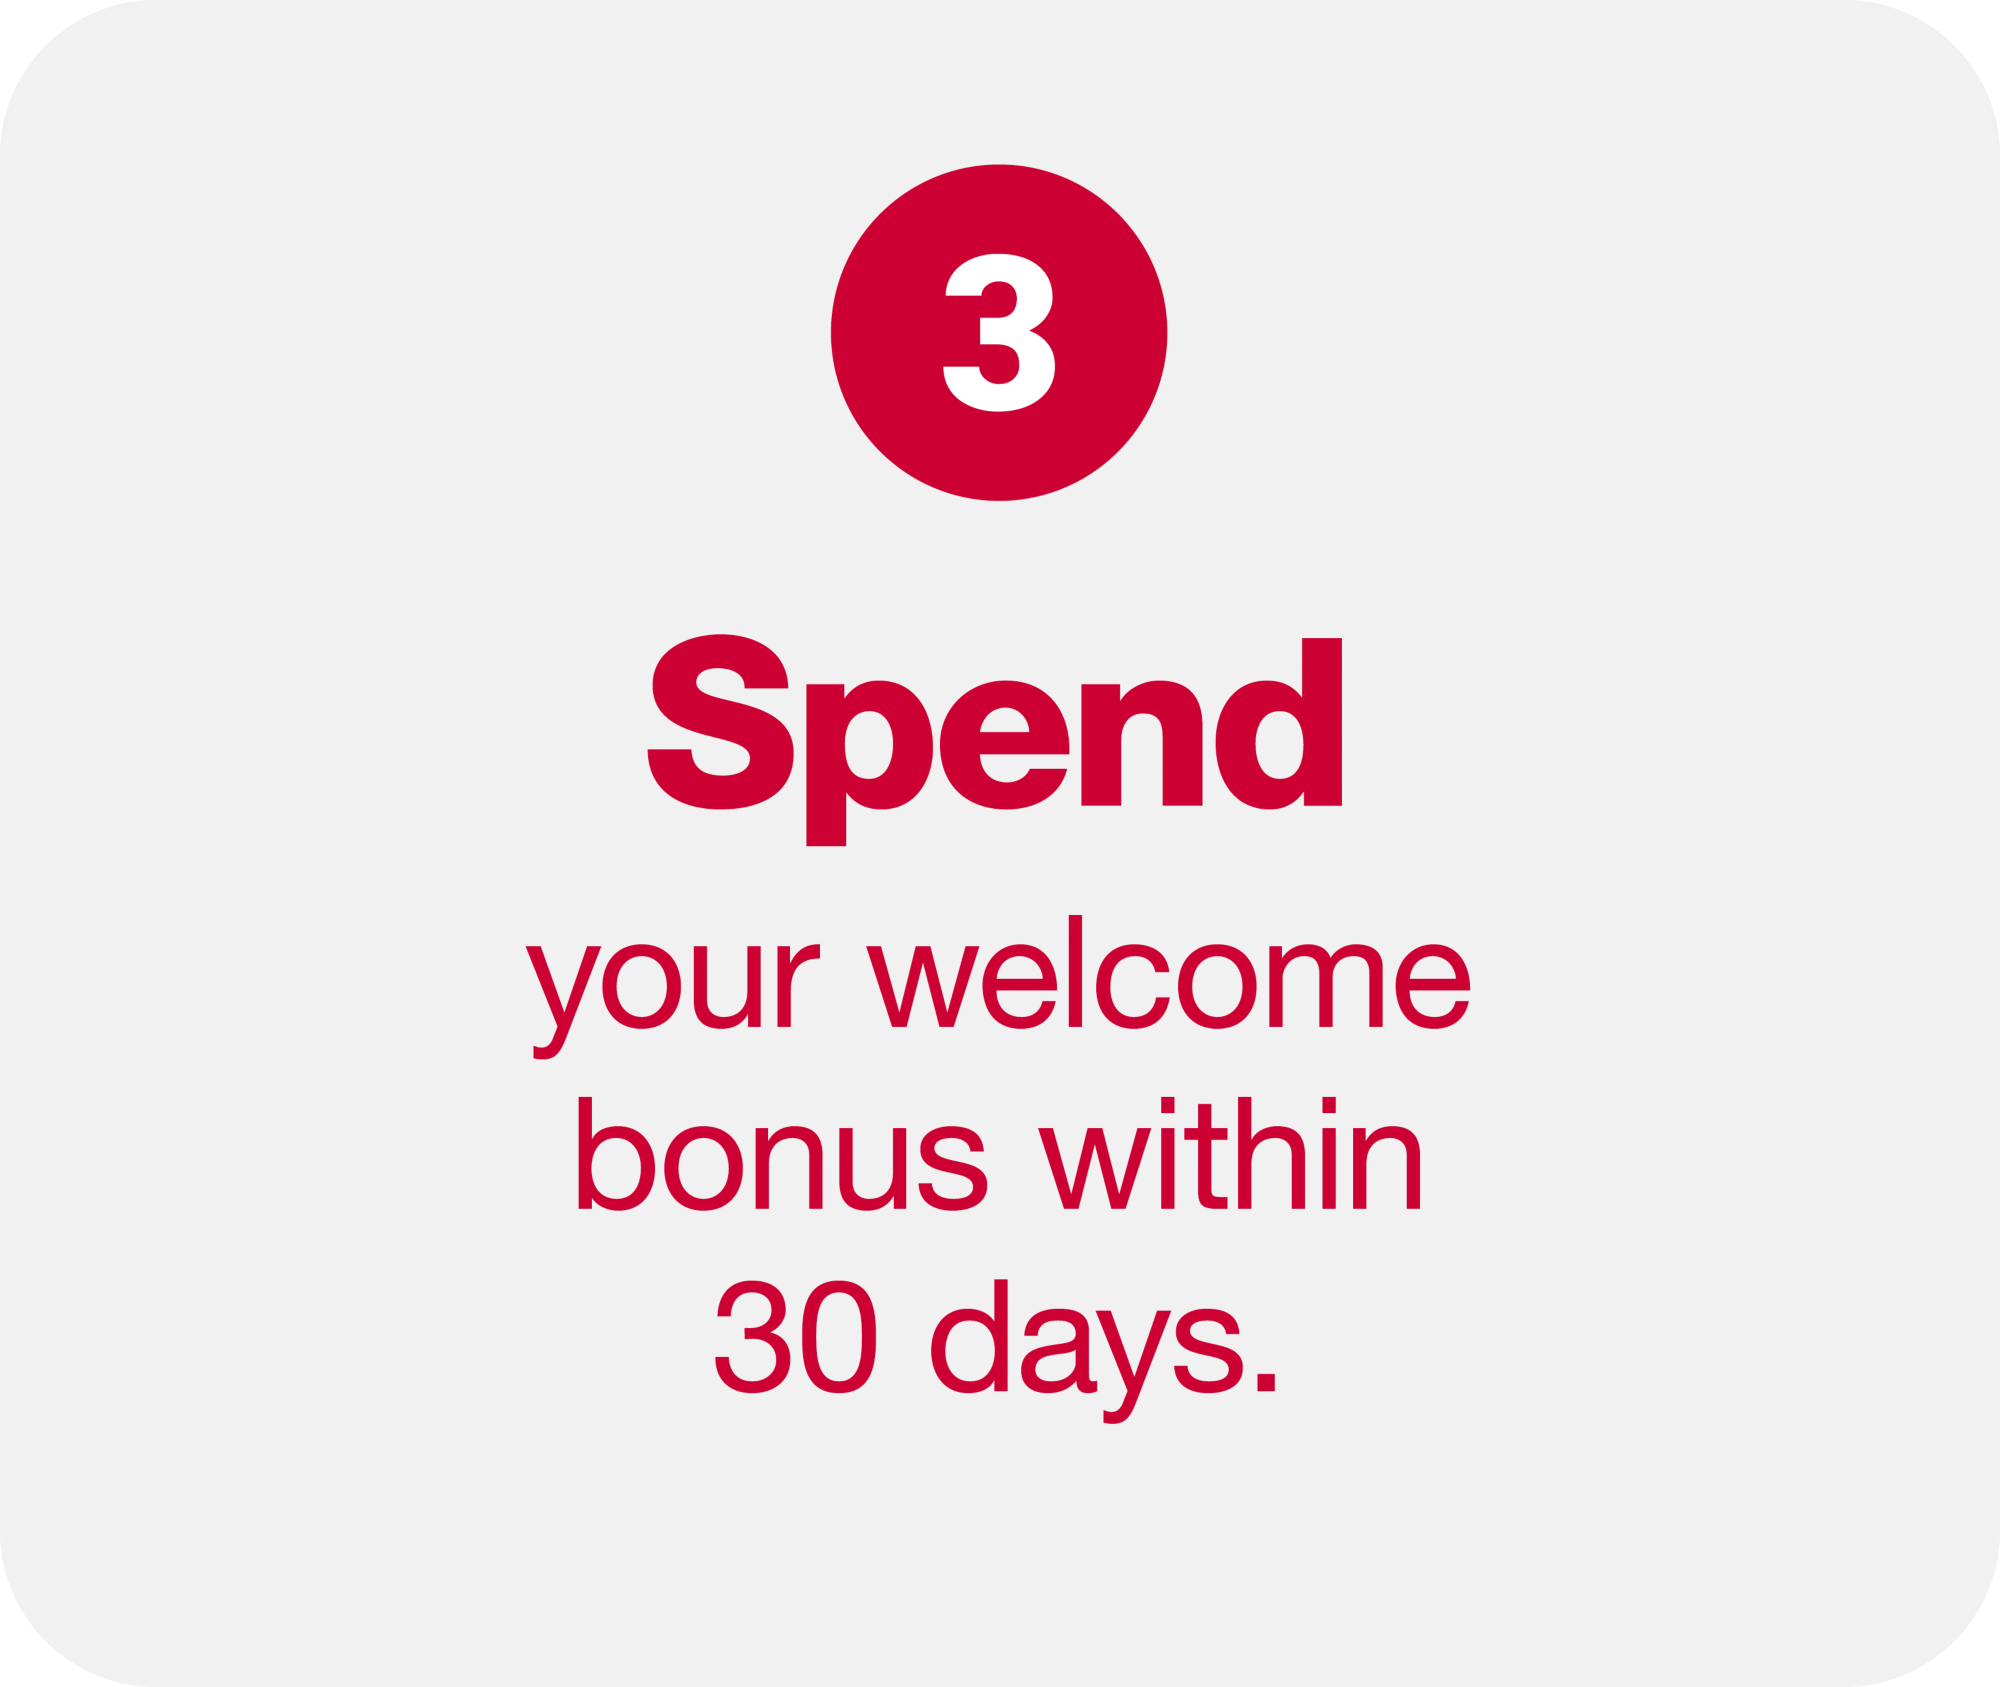 3.) Spend your welcome bonus within 30 days.